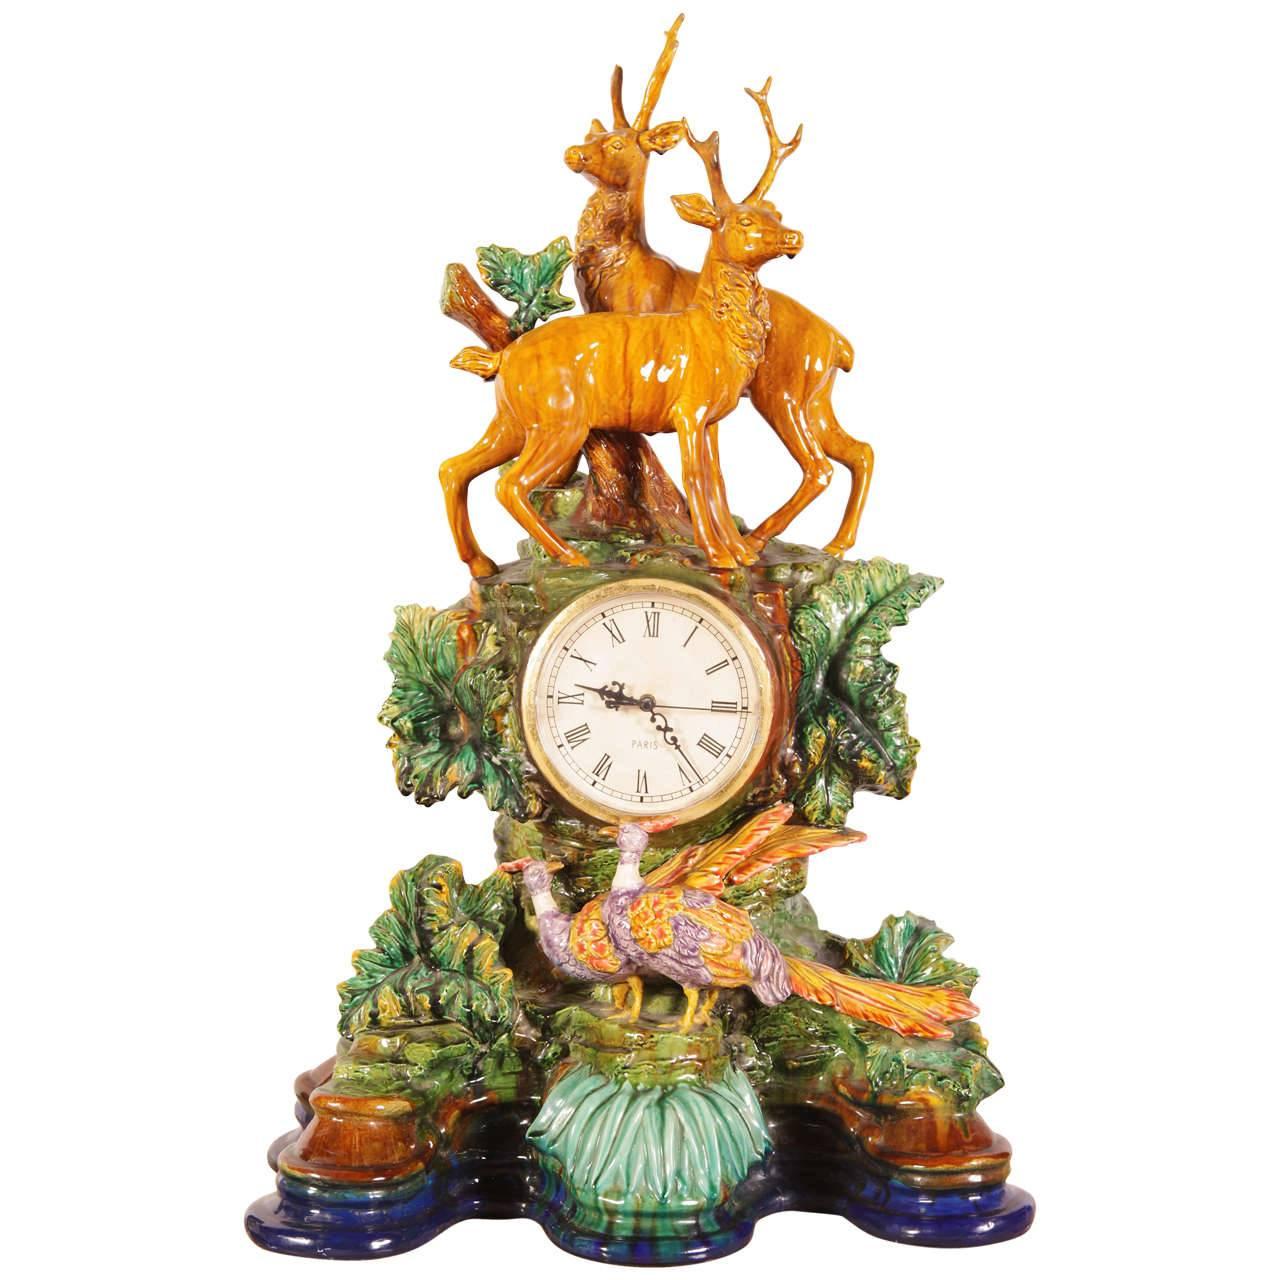 Early 20th Century French Majolica Black Forest Mantel Clock from Paris